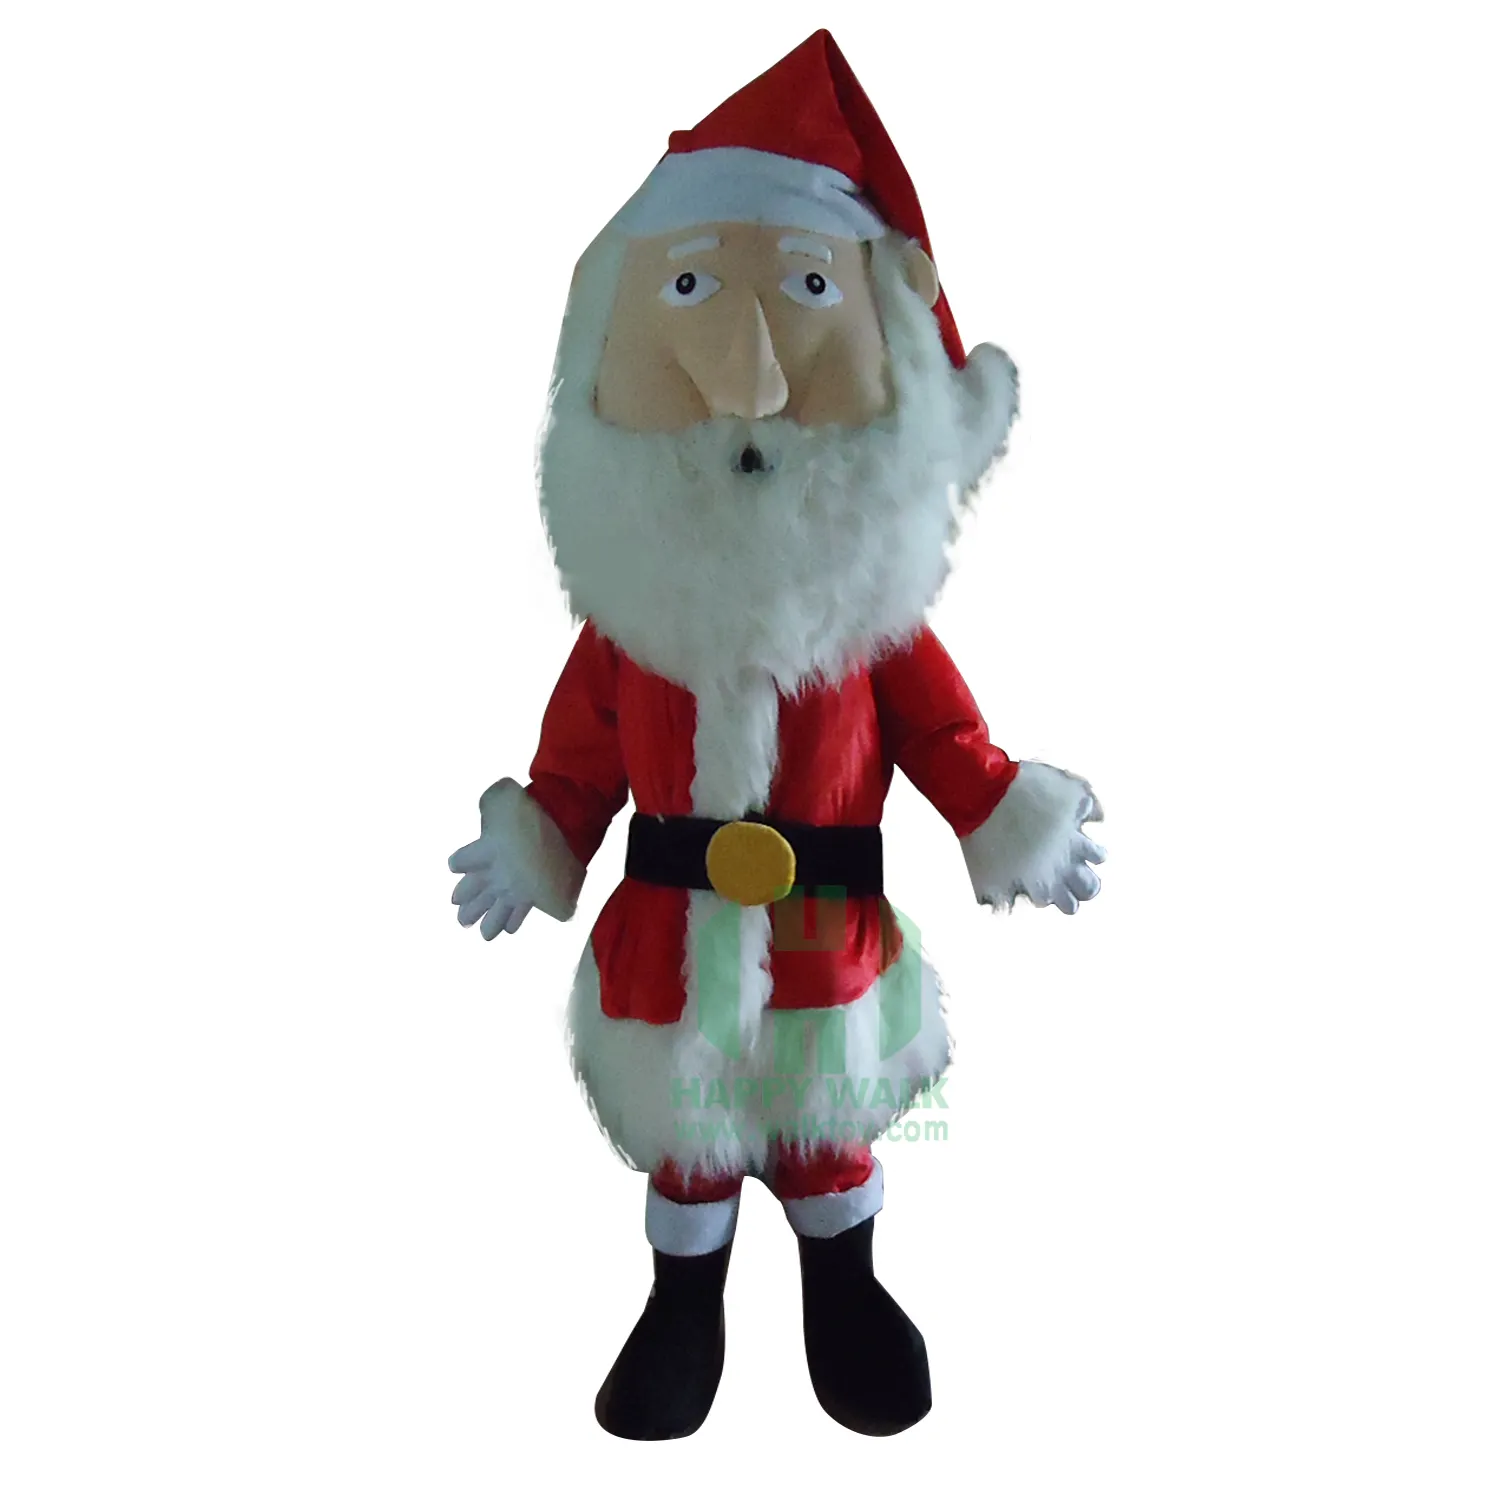 Santa Claus mascot costume for merry Christmas adult costume